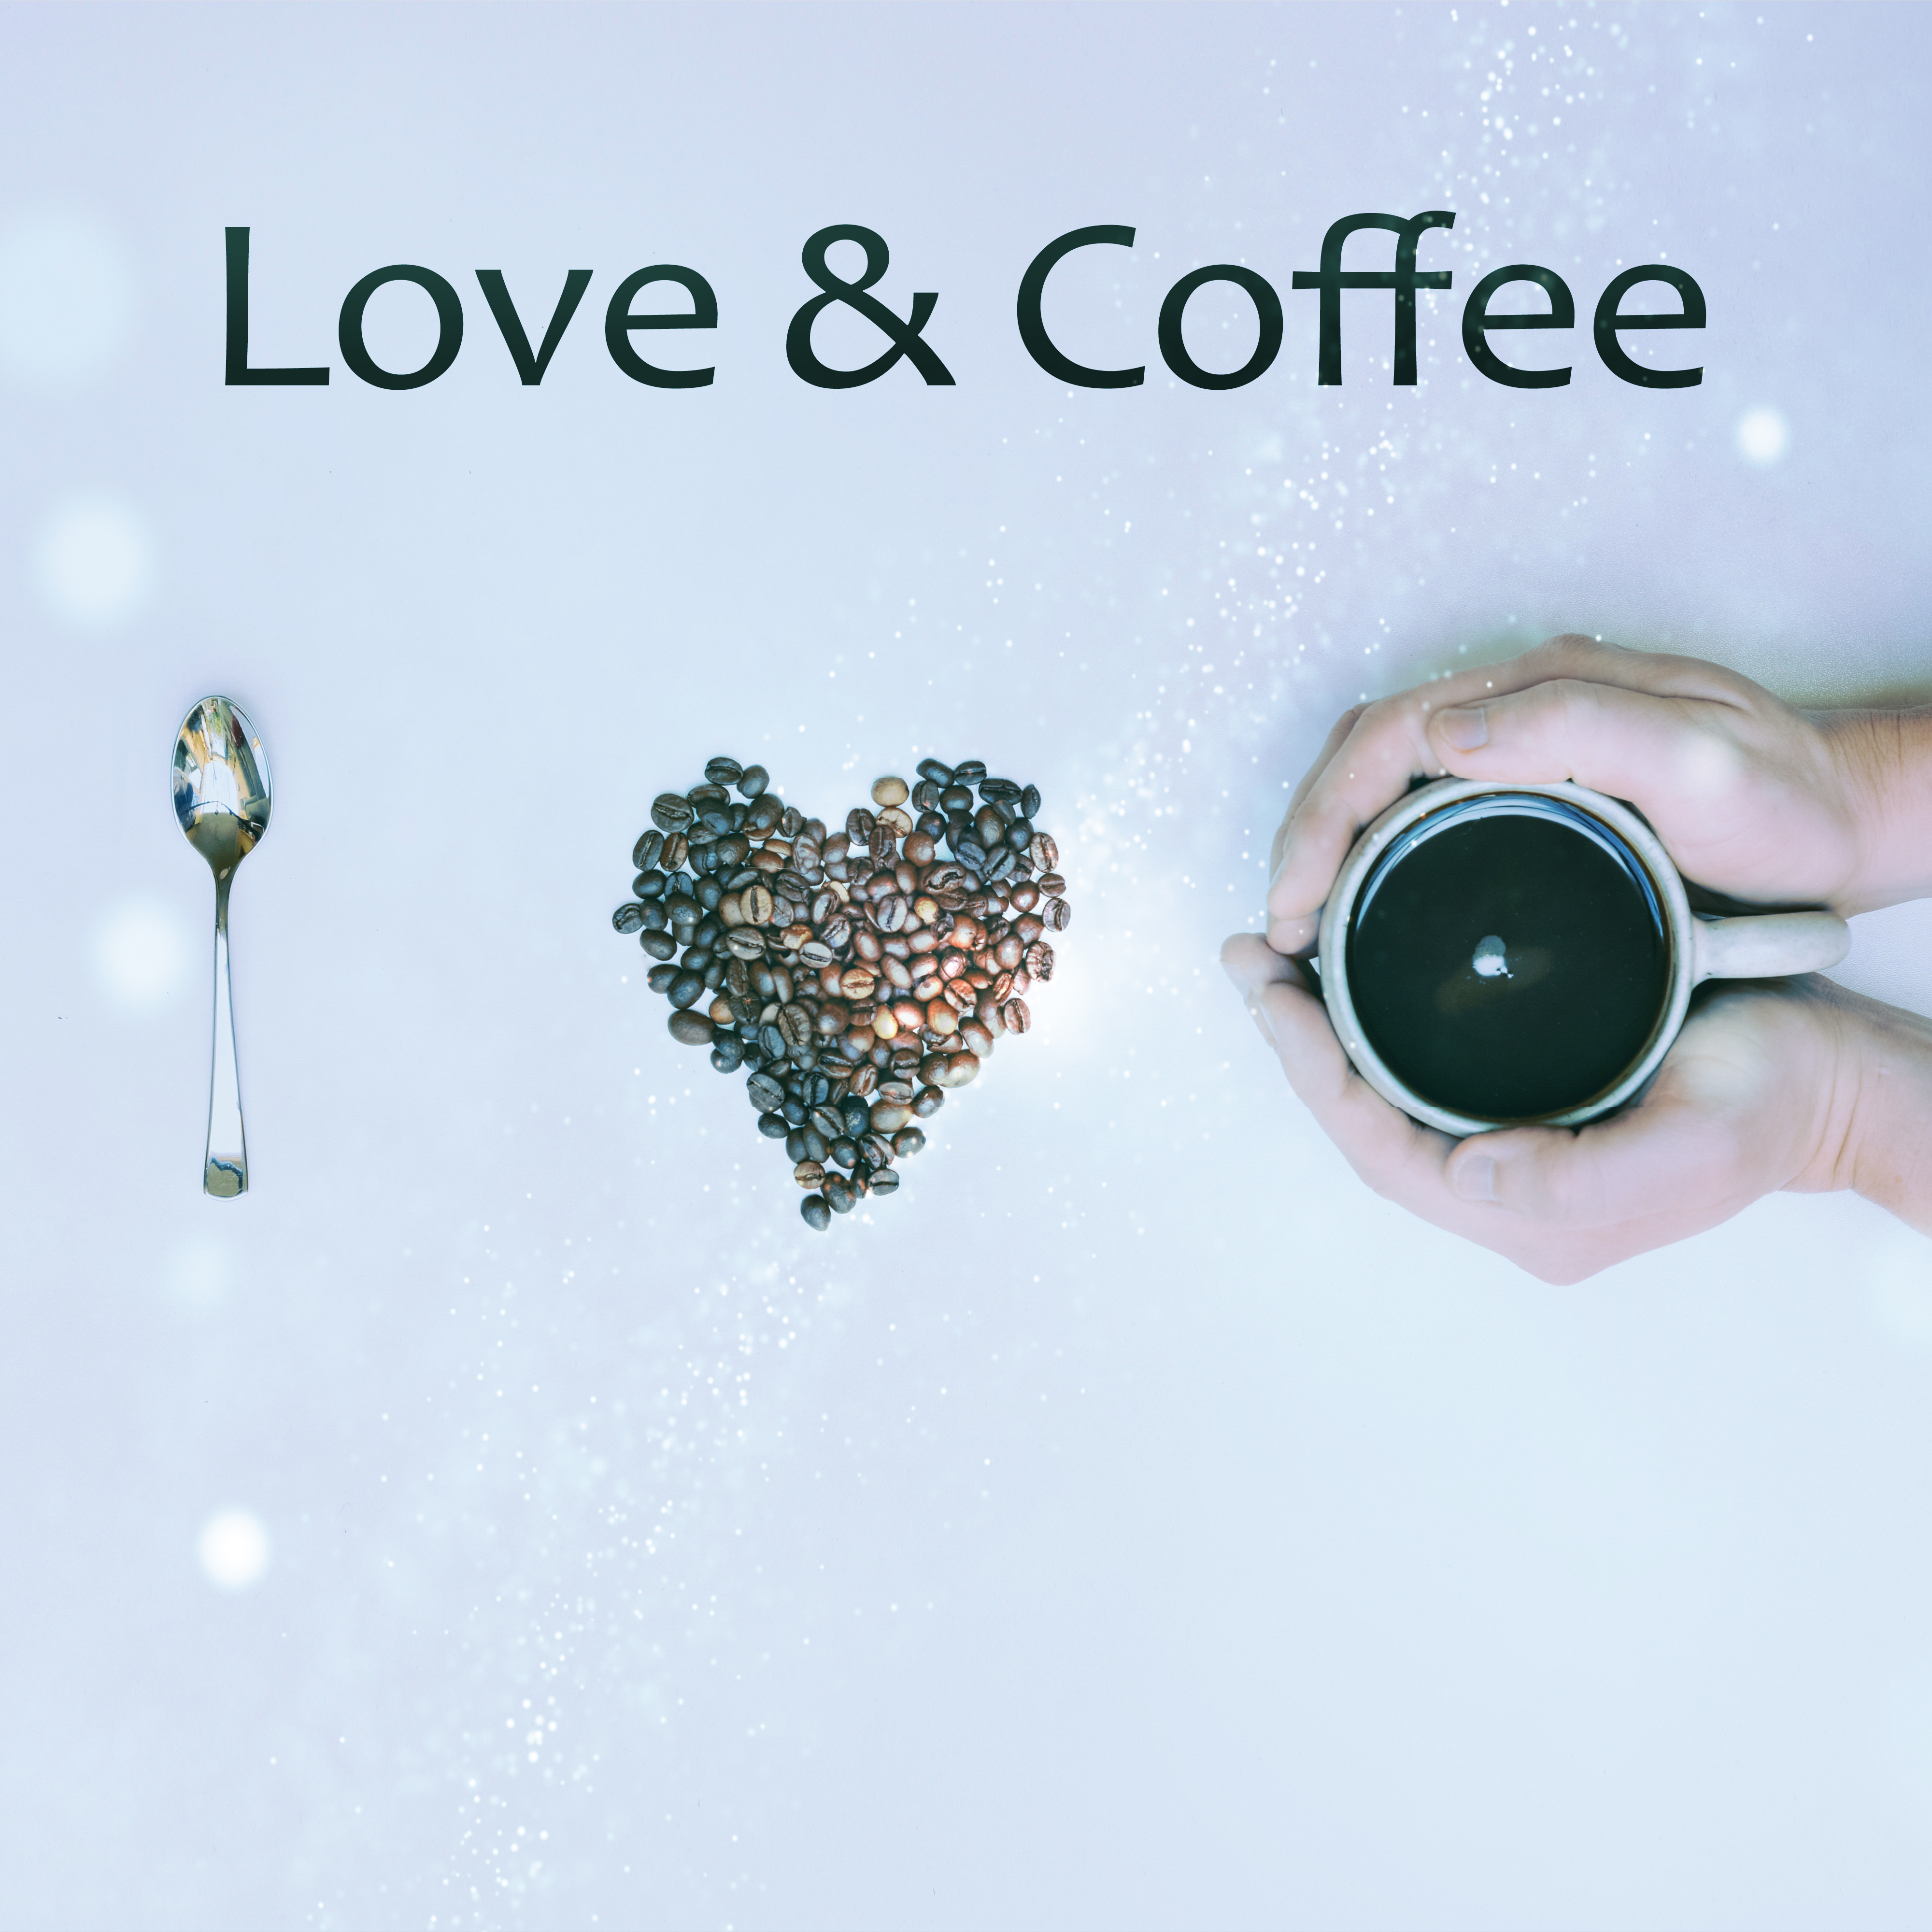 Love  Coffee  Mellow Jazz Instrumental, Music for Cafe  Restaurant, Easy Listening, Cafe Background Music, Solo Piano